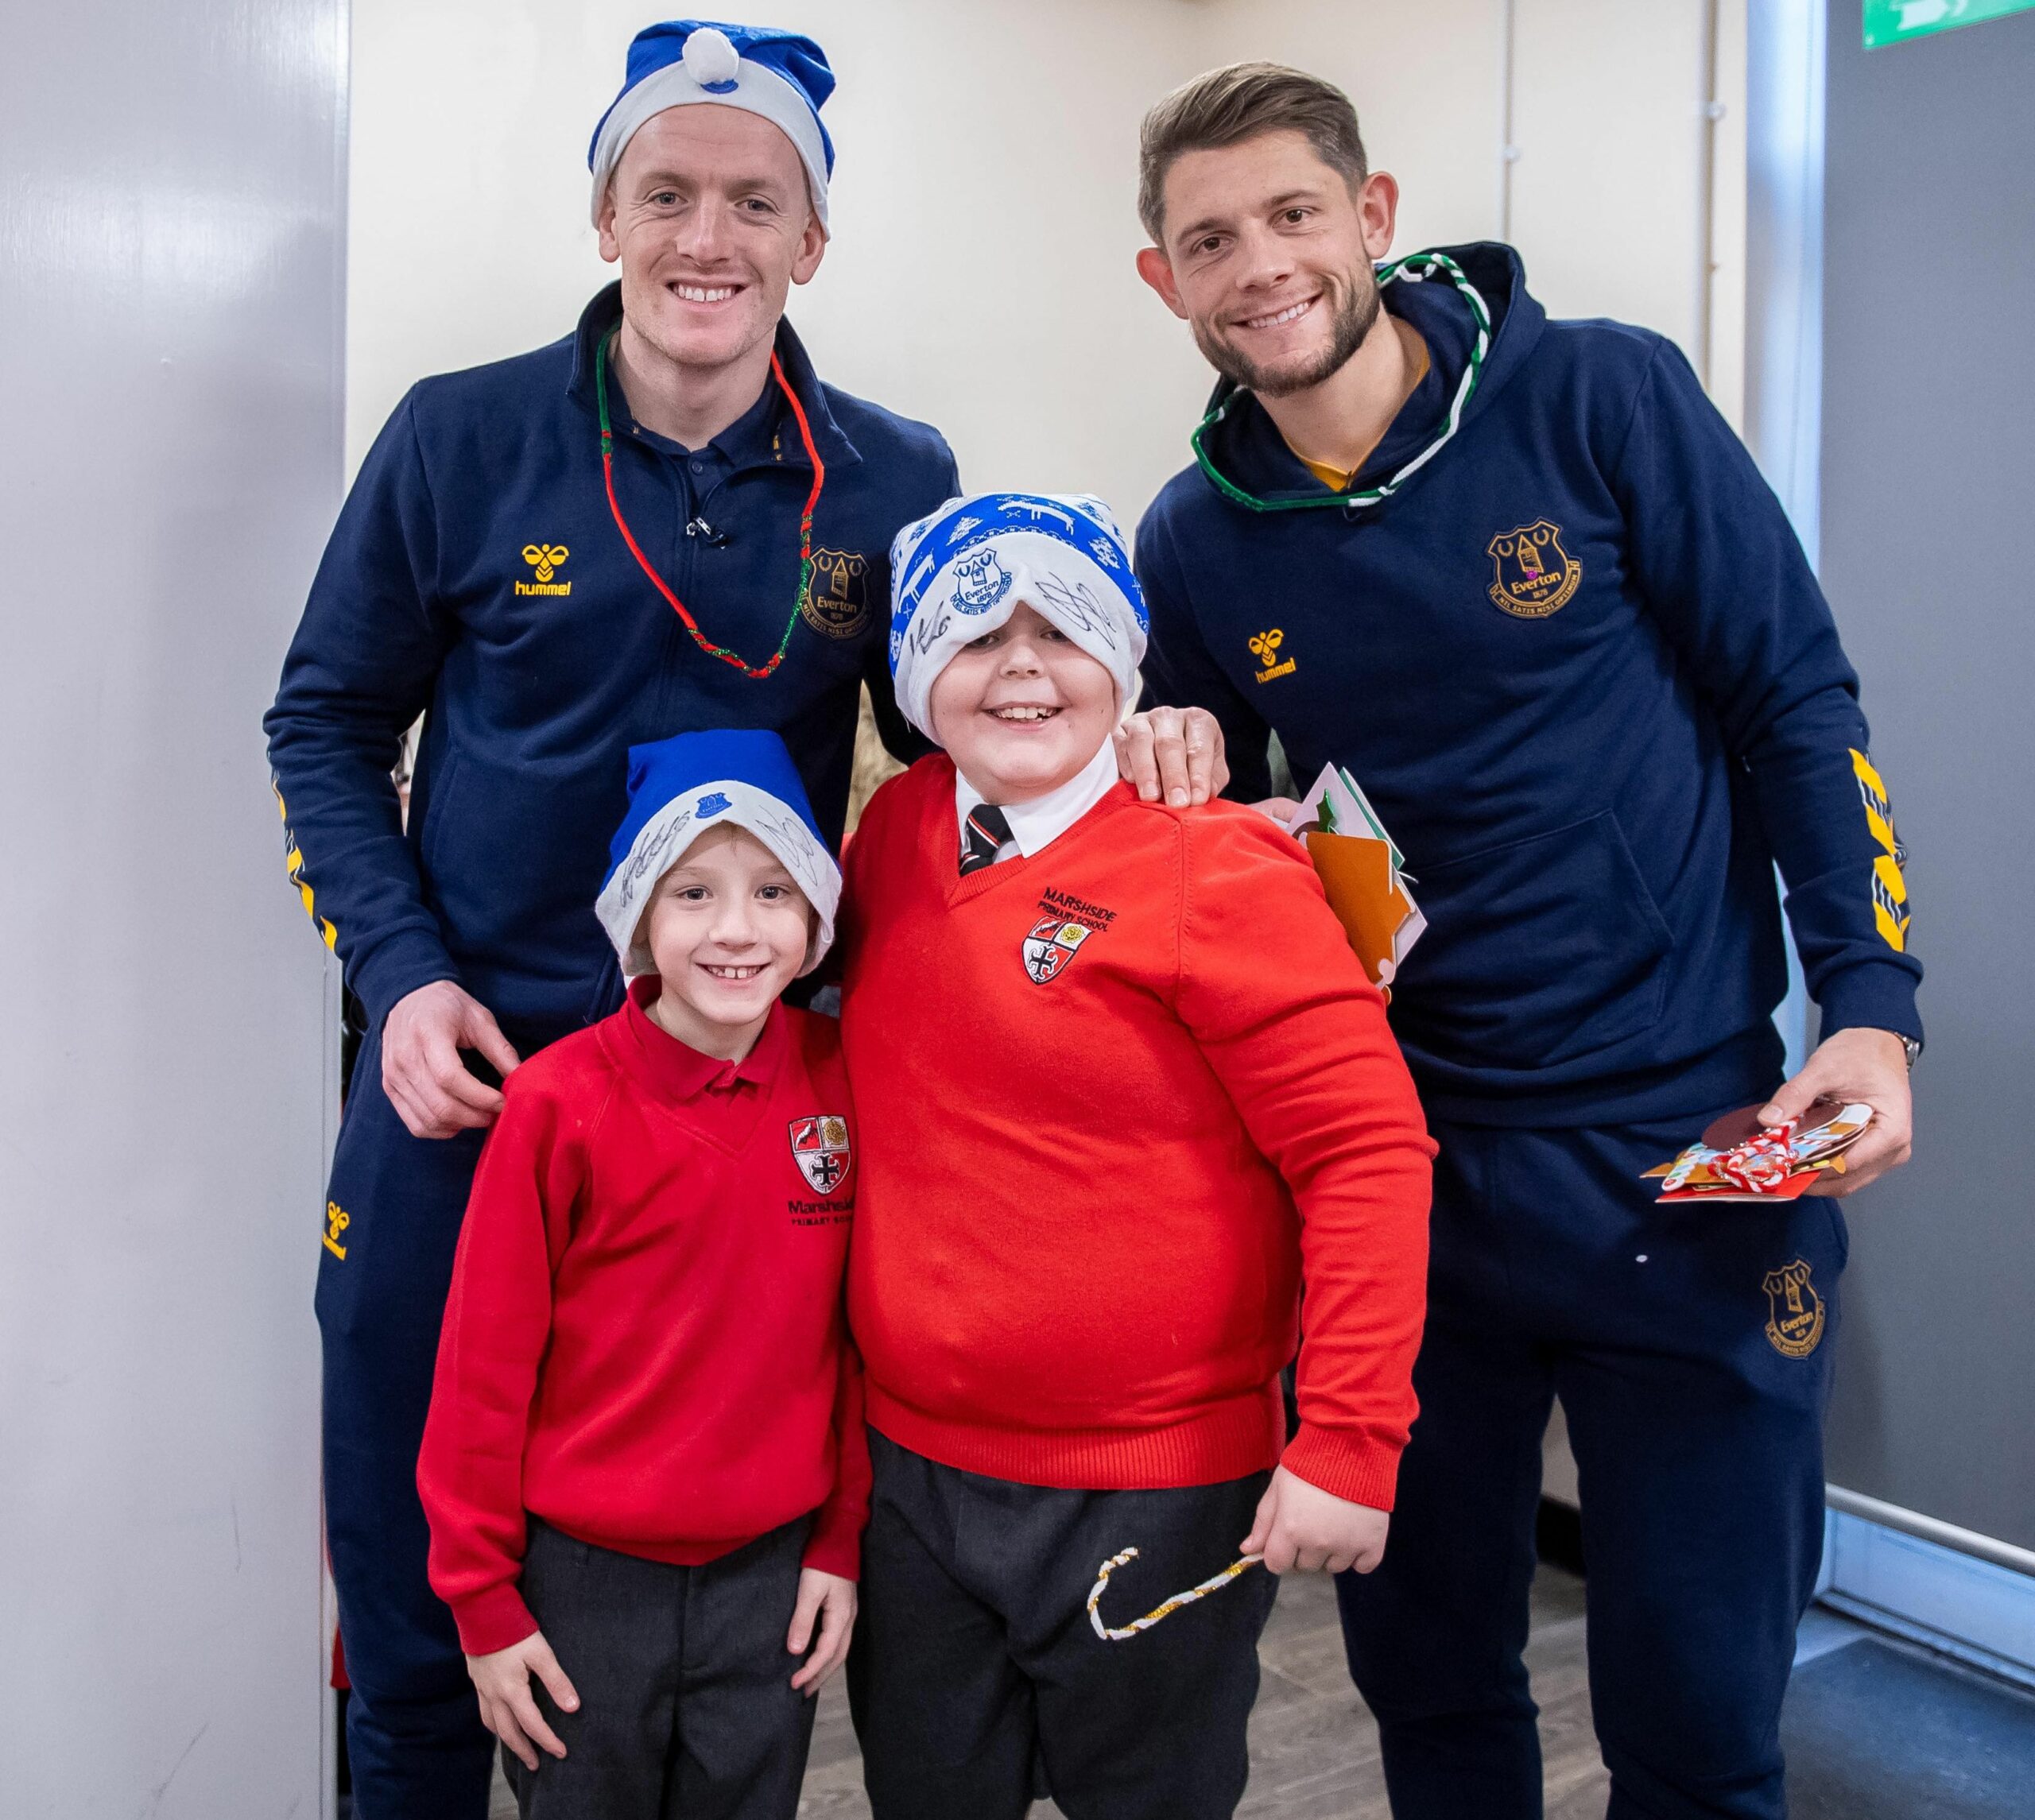 Thomas Ralphs, a pupil at Marshside Primary School in Southport, got an early Christmas treat when two of his Everton FC heroes surprised him midway through a school carol rehearsal. Photo by Everton FC